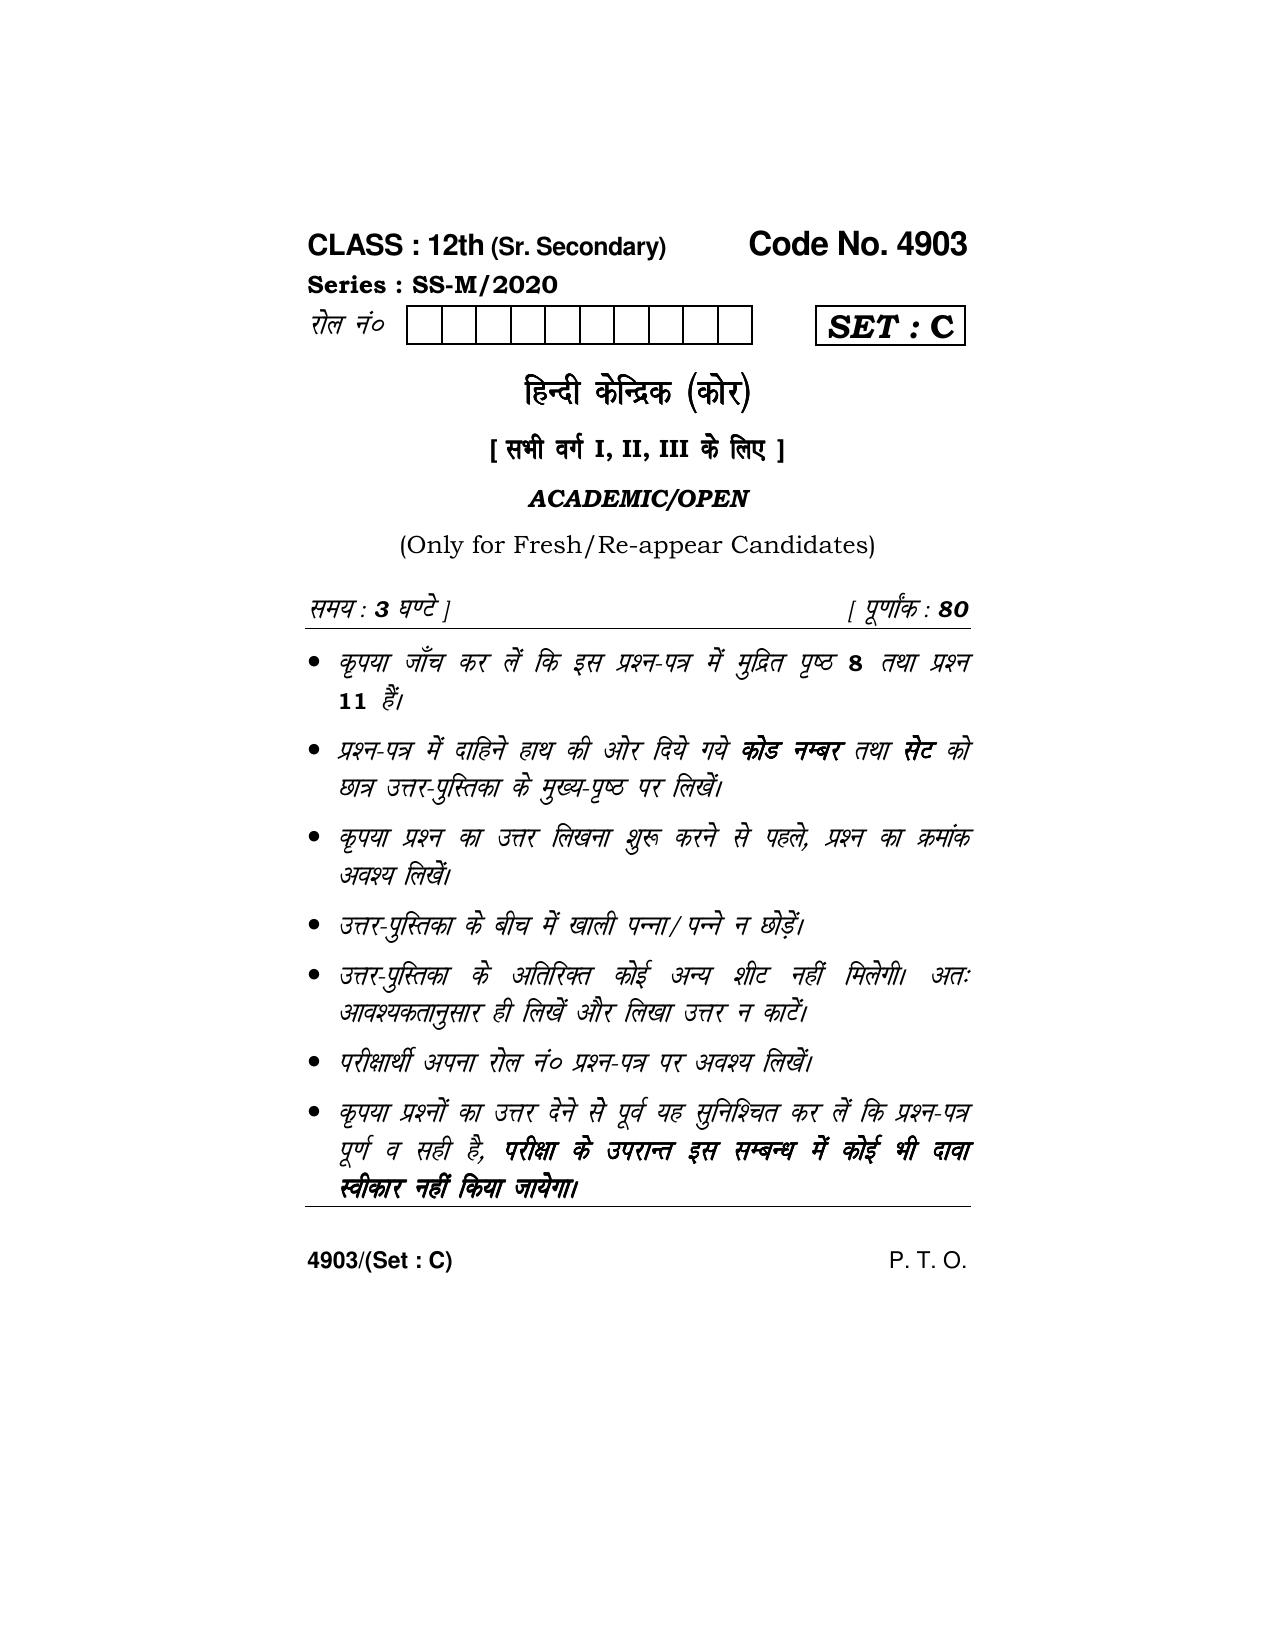 Haryana Board HBSE Class 12 Hindi Core 2020 Question Paper - Page 17